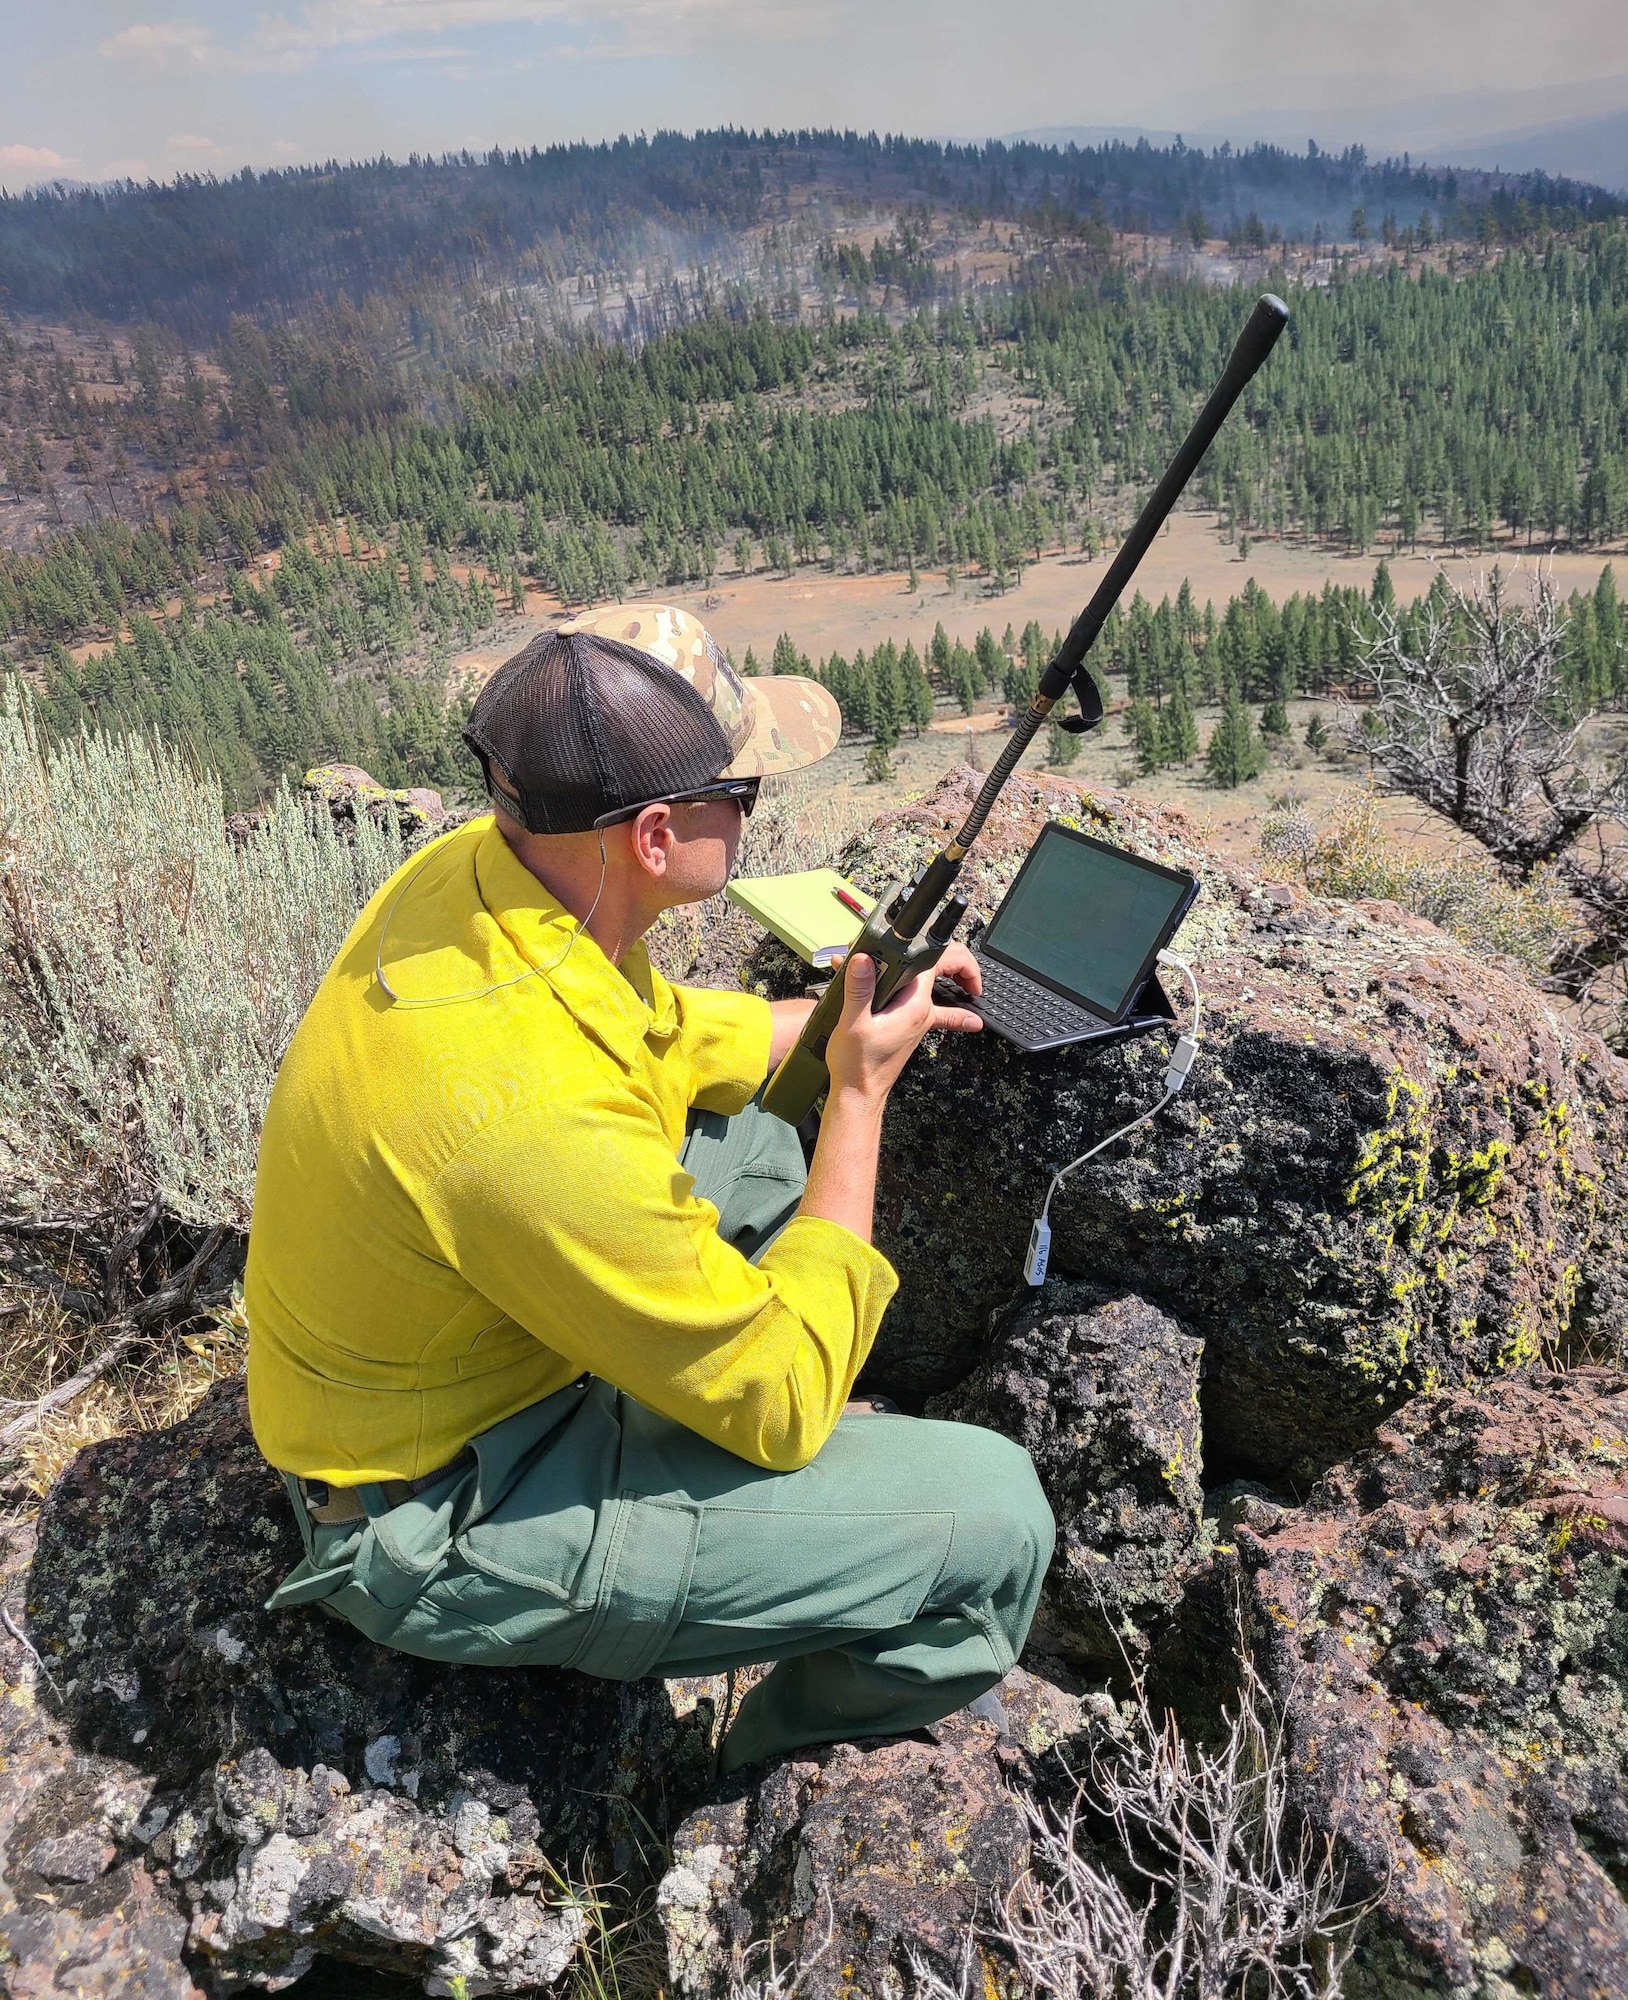 Master Sgt. Brent Hill, Pennsylvania Air National Guard, controls the infrared imagery on an RC26 in support of burn operations on the Beckwourth Fire in California from western Nevada July 13, 2021. Hill is part of a team of imagery experts providing live aerial video streaming to fire bosses working on the front lines of the California wildfires.